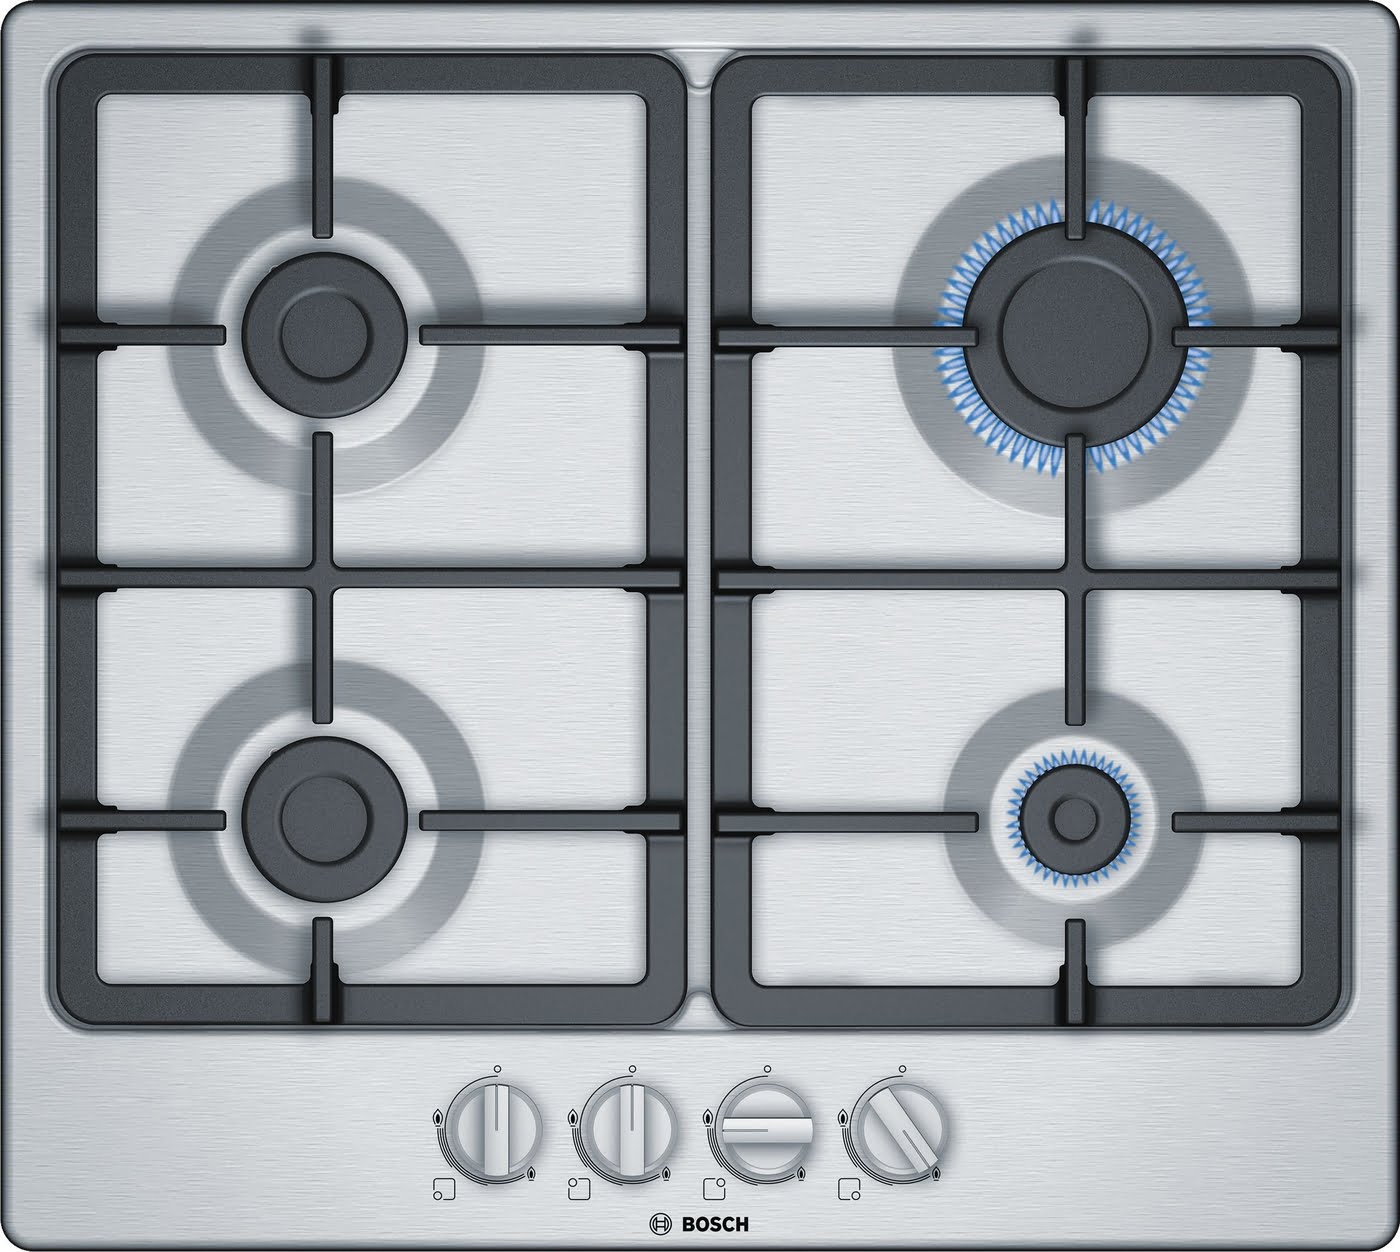 Bosch PGP6B5B90 58.2cm Gas Hob - Stainless Steel